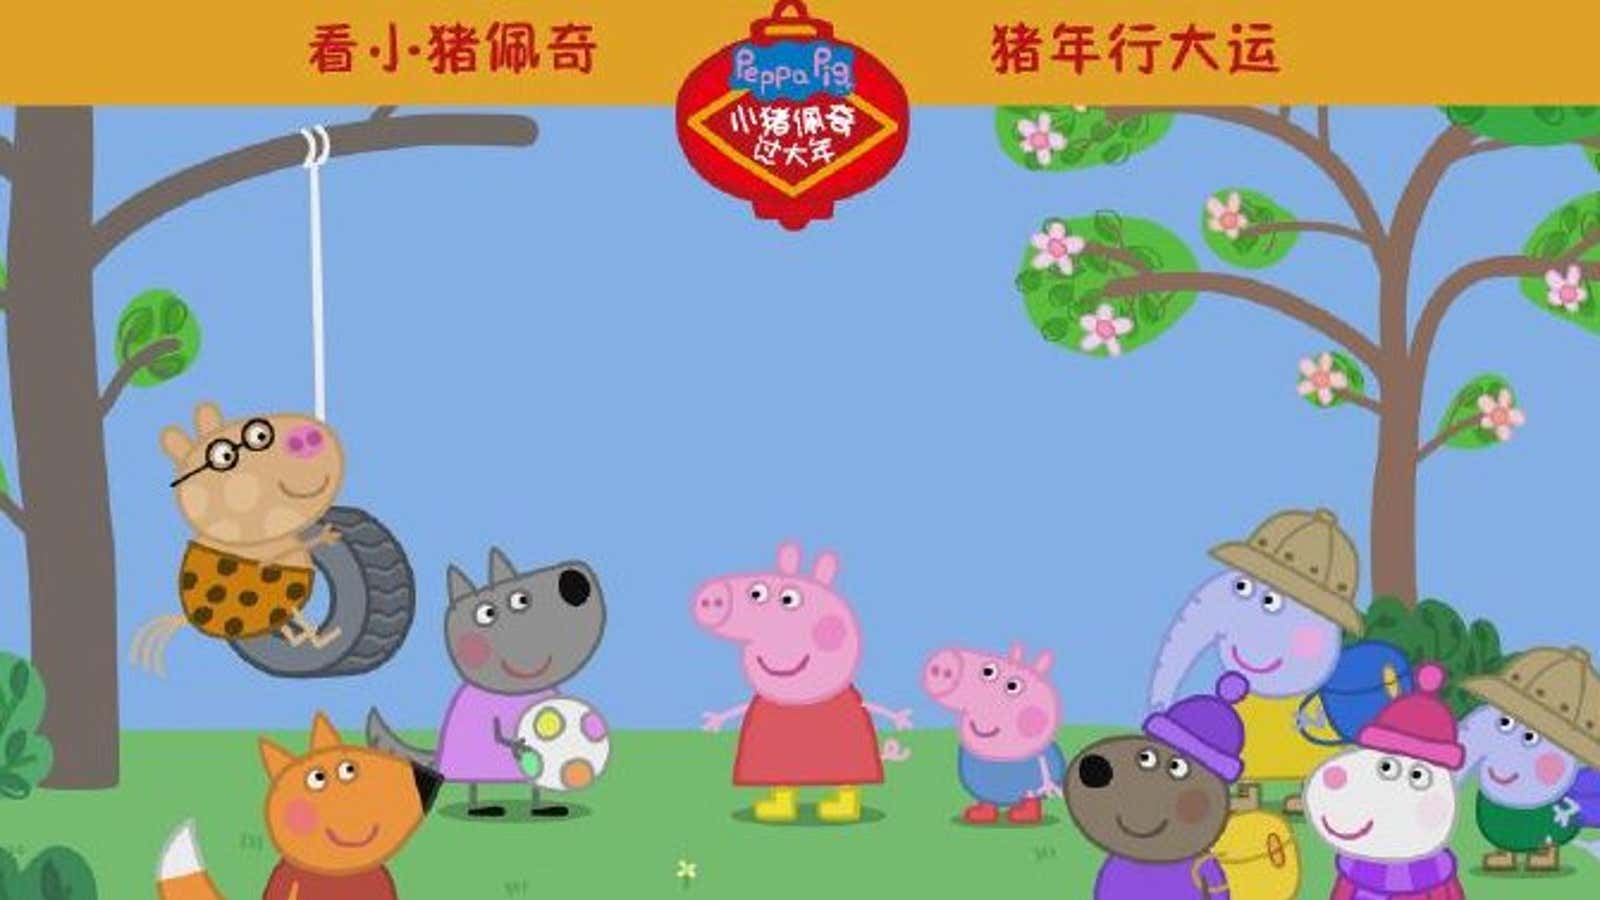 Peppa Pig and her friends in the Chinese movie.